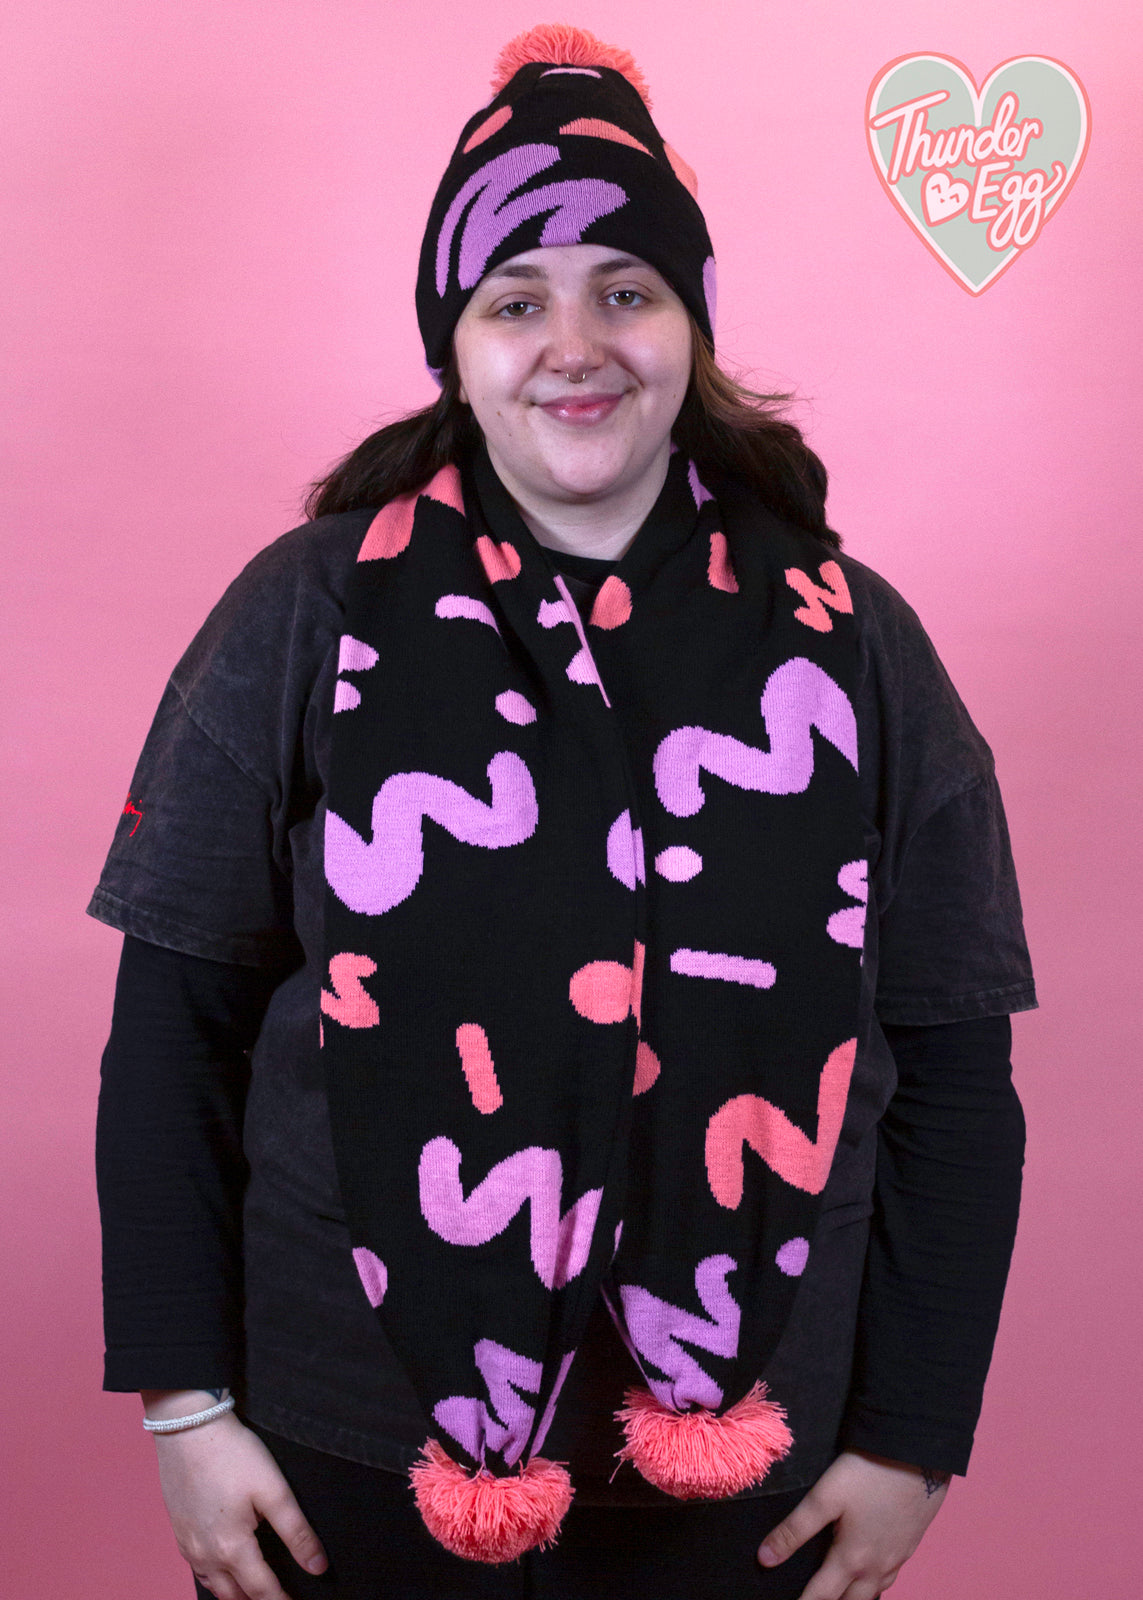 Home of Rainbows - Pink Squiggle Knit Pom Pom Scarf Home of Rainbows - Pink Squiggle Knit Pom Pom Hat